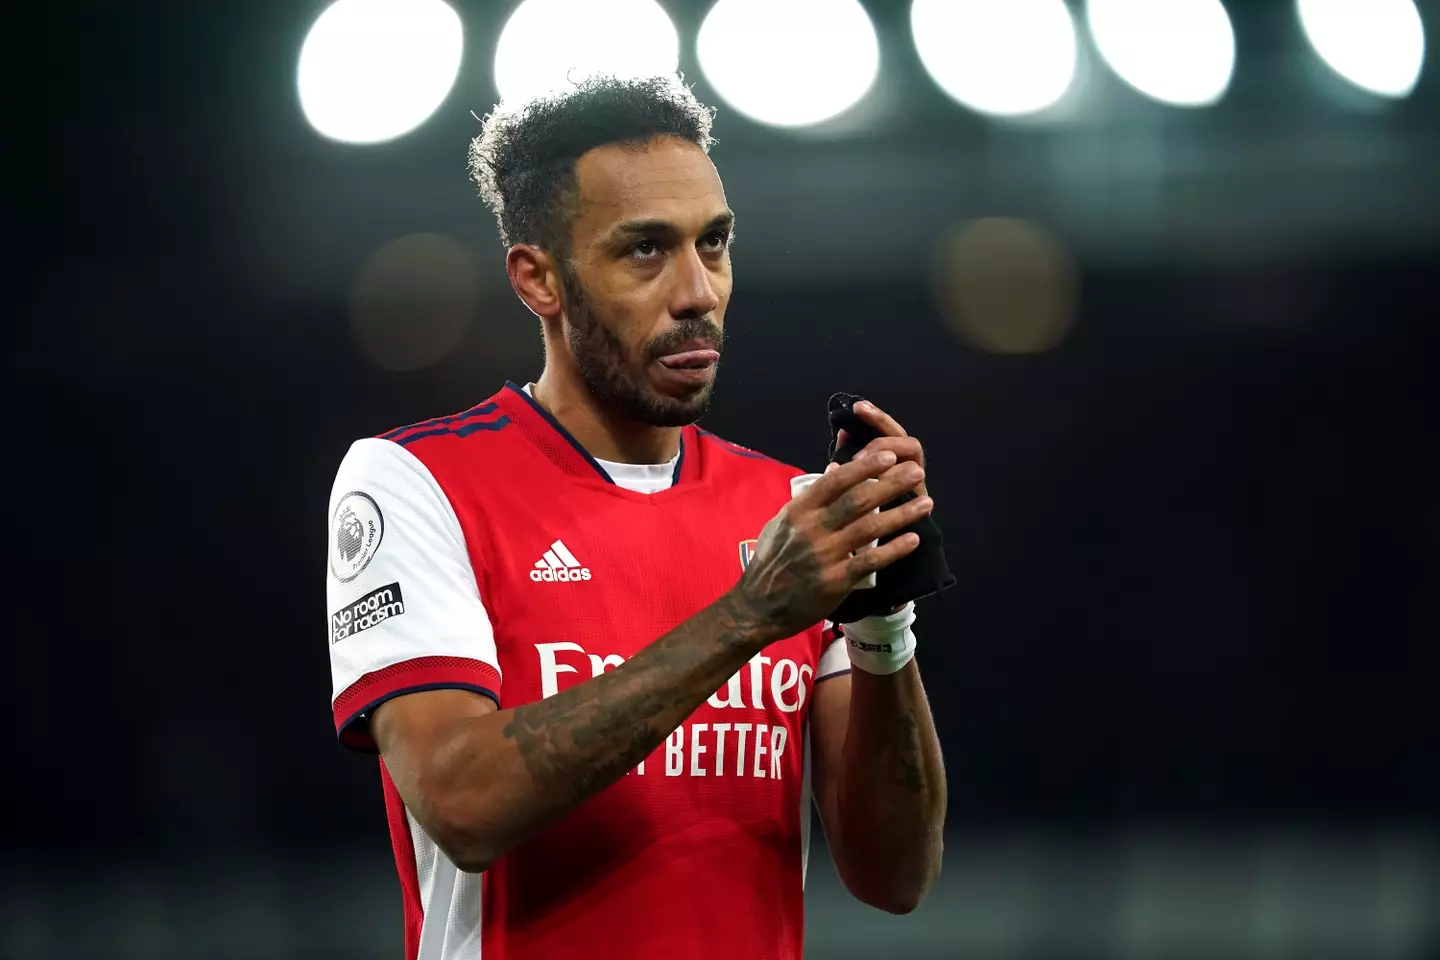 Aubameyang has been stripped of the Arsenal captaincy (Image credit: PA)